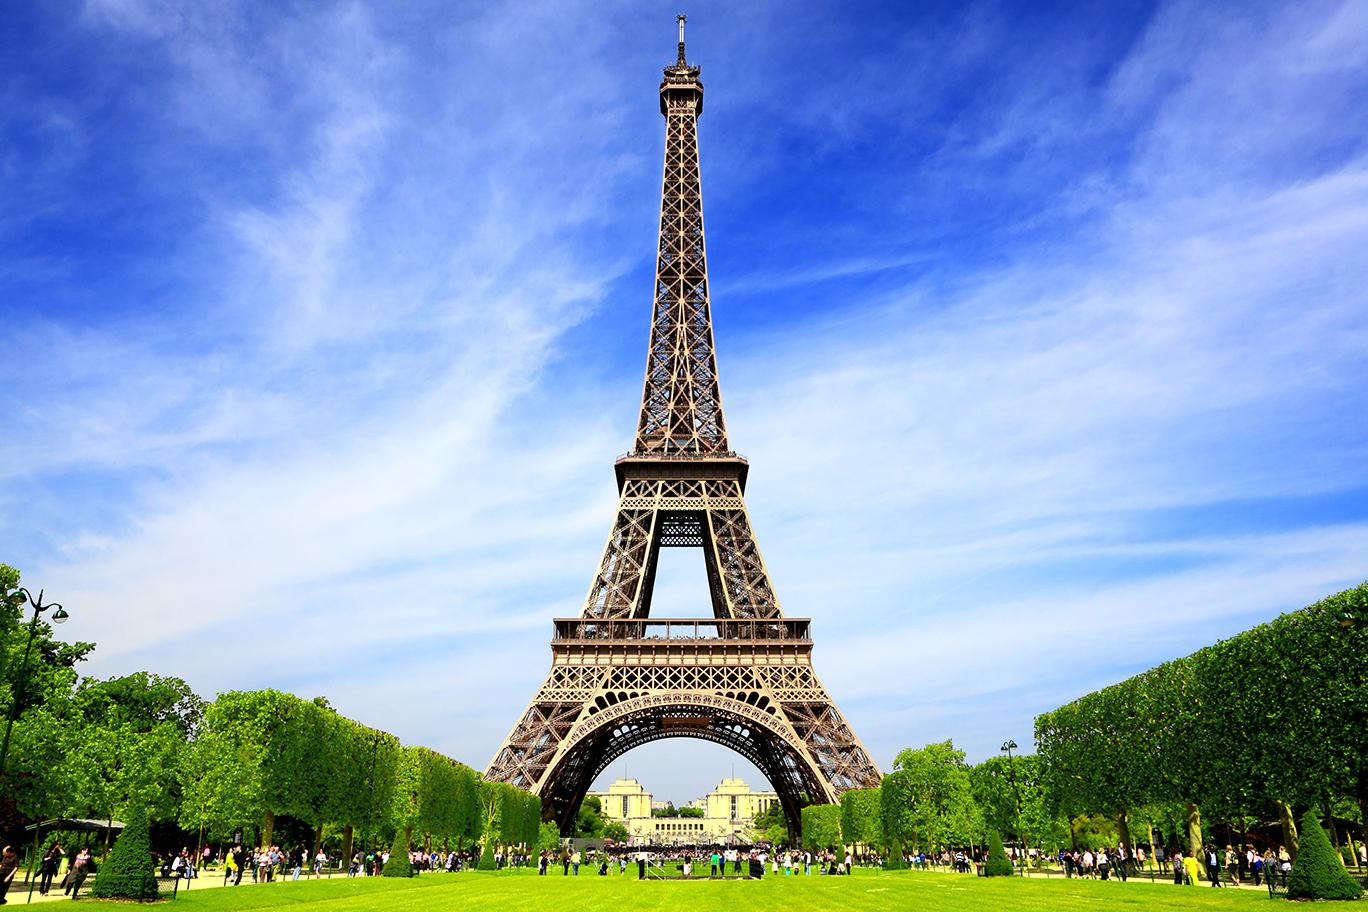 Discover must see attractions in Paris like the Eiffel Tower with France tours & excursions